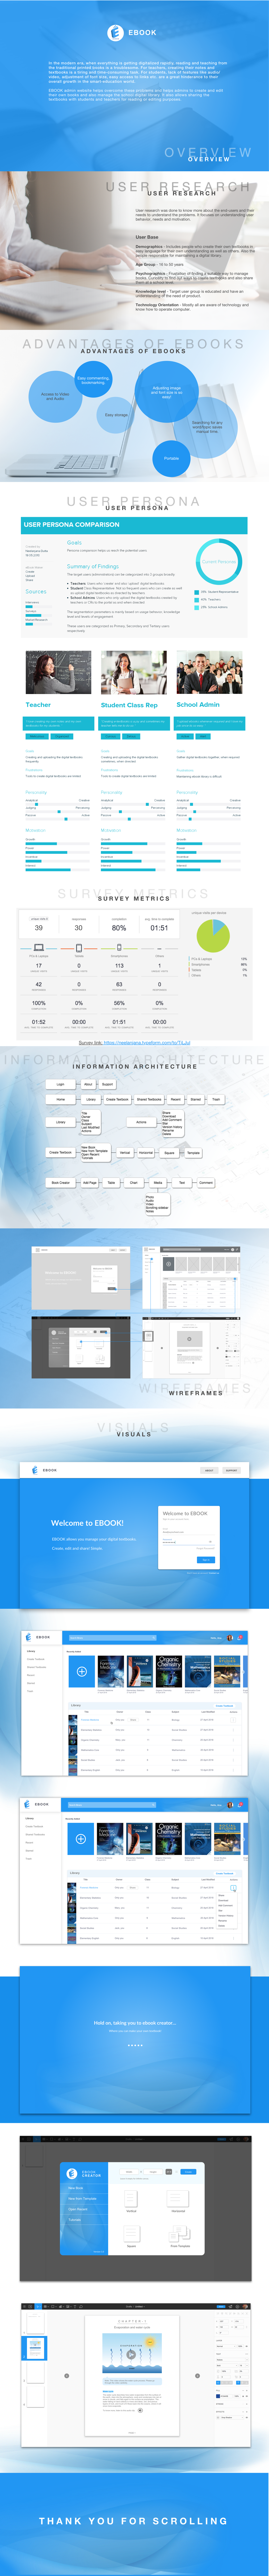 admin dashboard admin panel information architecture  wireframes Prototypes digital books ebook user experience persona